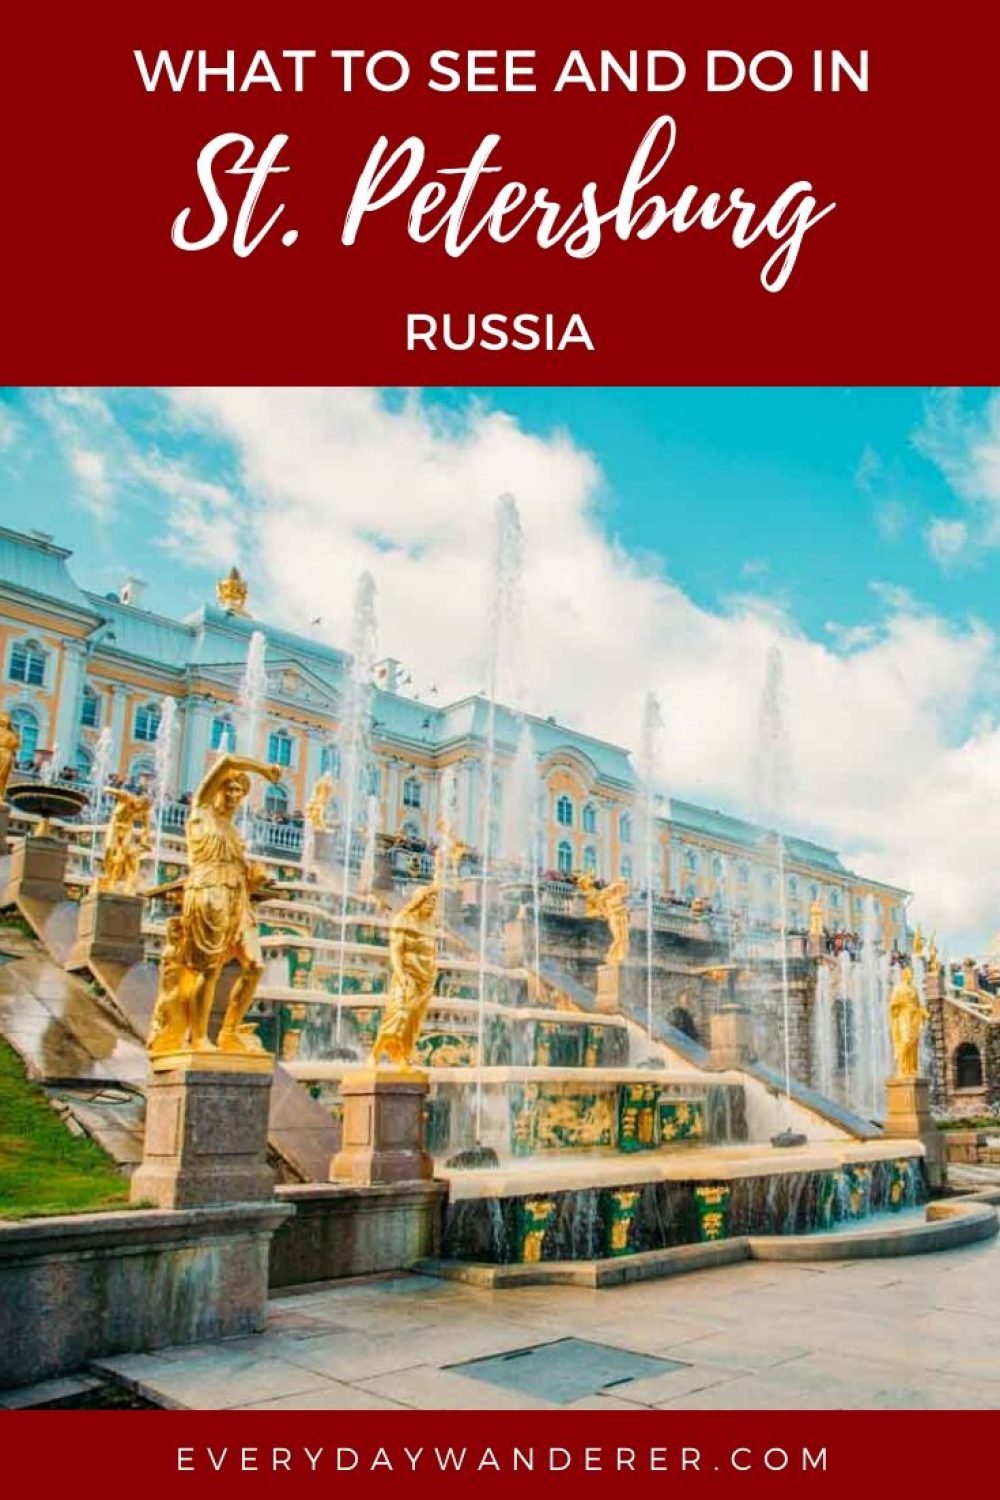 Things to do in St Petersburg Russia including St Petersburg things to do in winter, St Petersburg food, and St Petersburg palaces like the Catherline Palace in Pushkin Russia. Visit St Petersburg Russia on the Baltic Sea #stpetersburg #russia #europe #travel